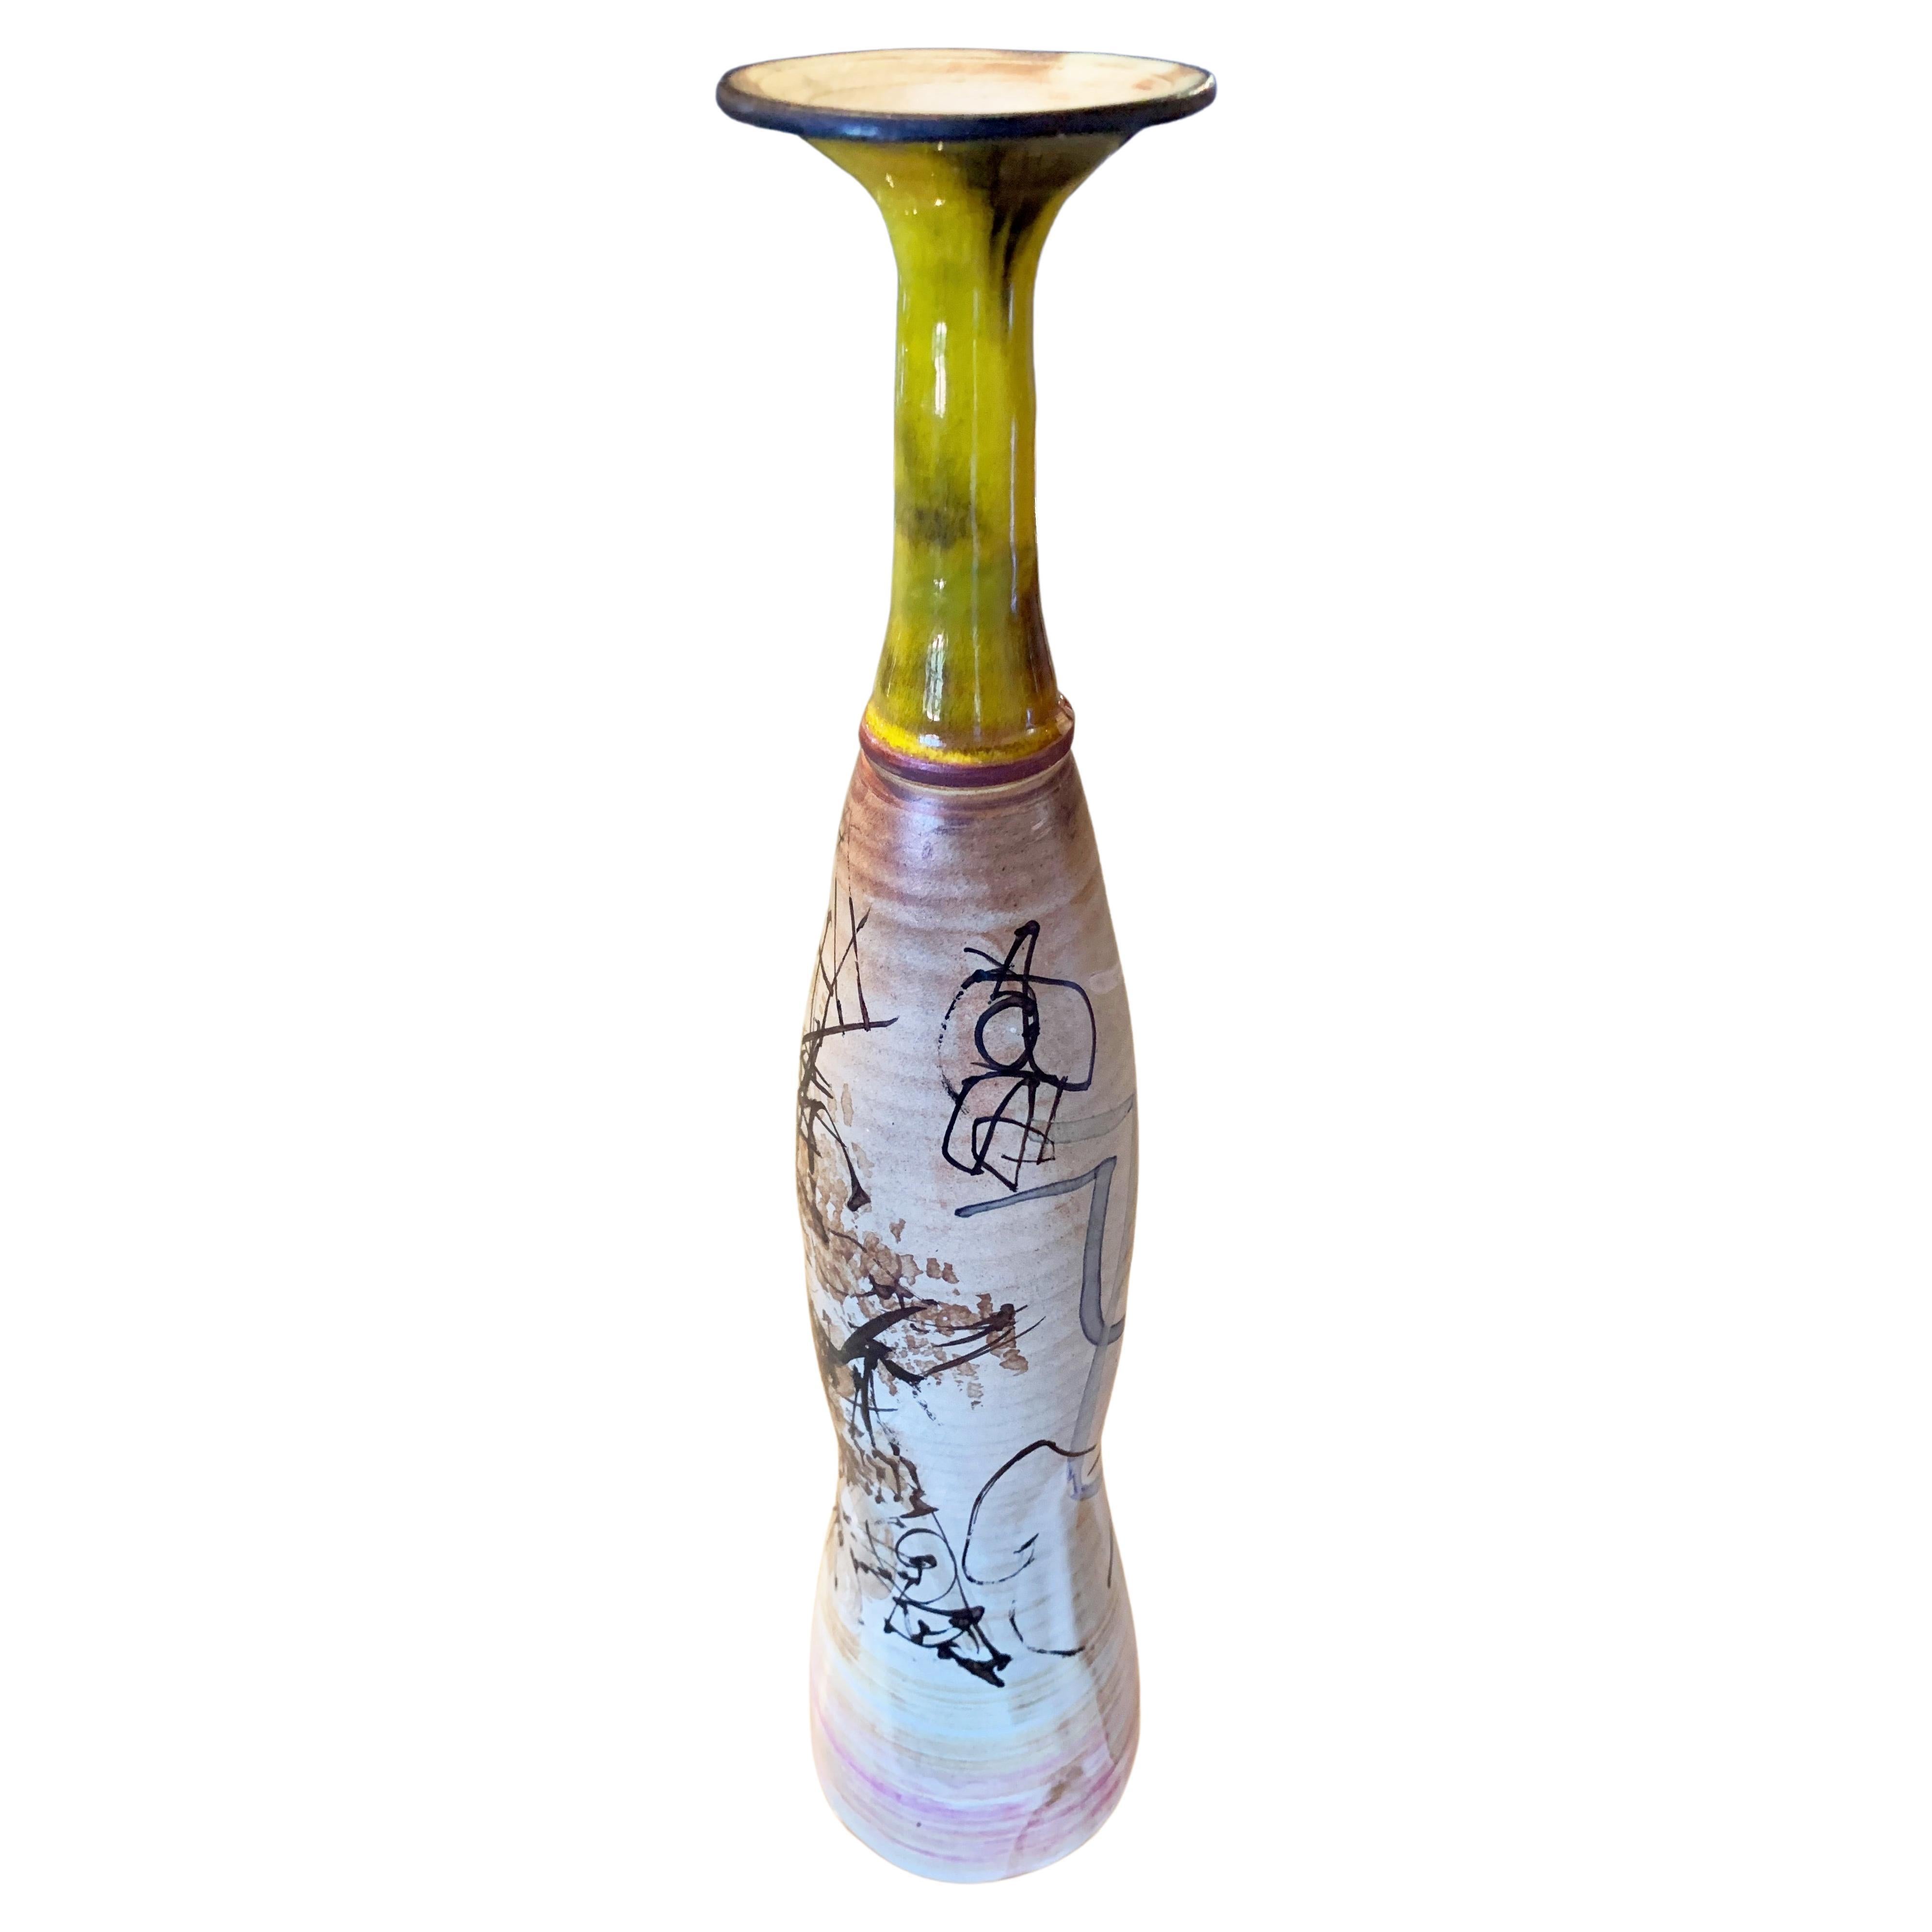 Rare, vintage bottle-neck vase by Gilbert Portanier, 1967.
Gilbert Portanier is a “ceramist painter” and he has contributed to the ongoing revival of French ceramics from the time he moved to Vallauris in 1948 until today. He is 96 and still makes